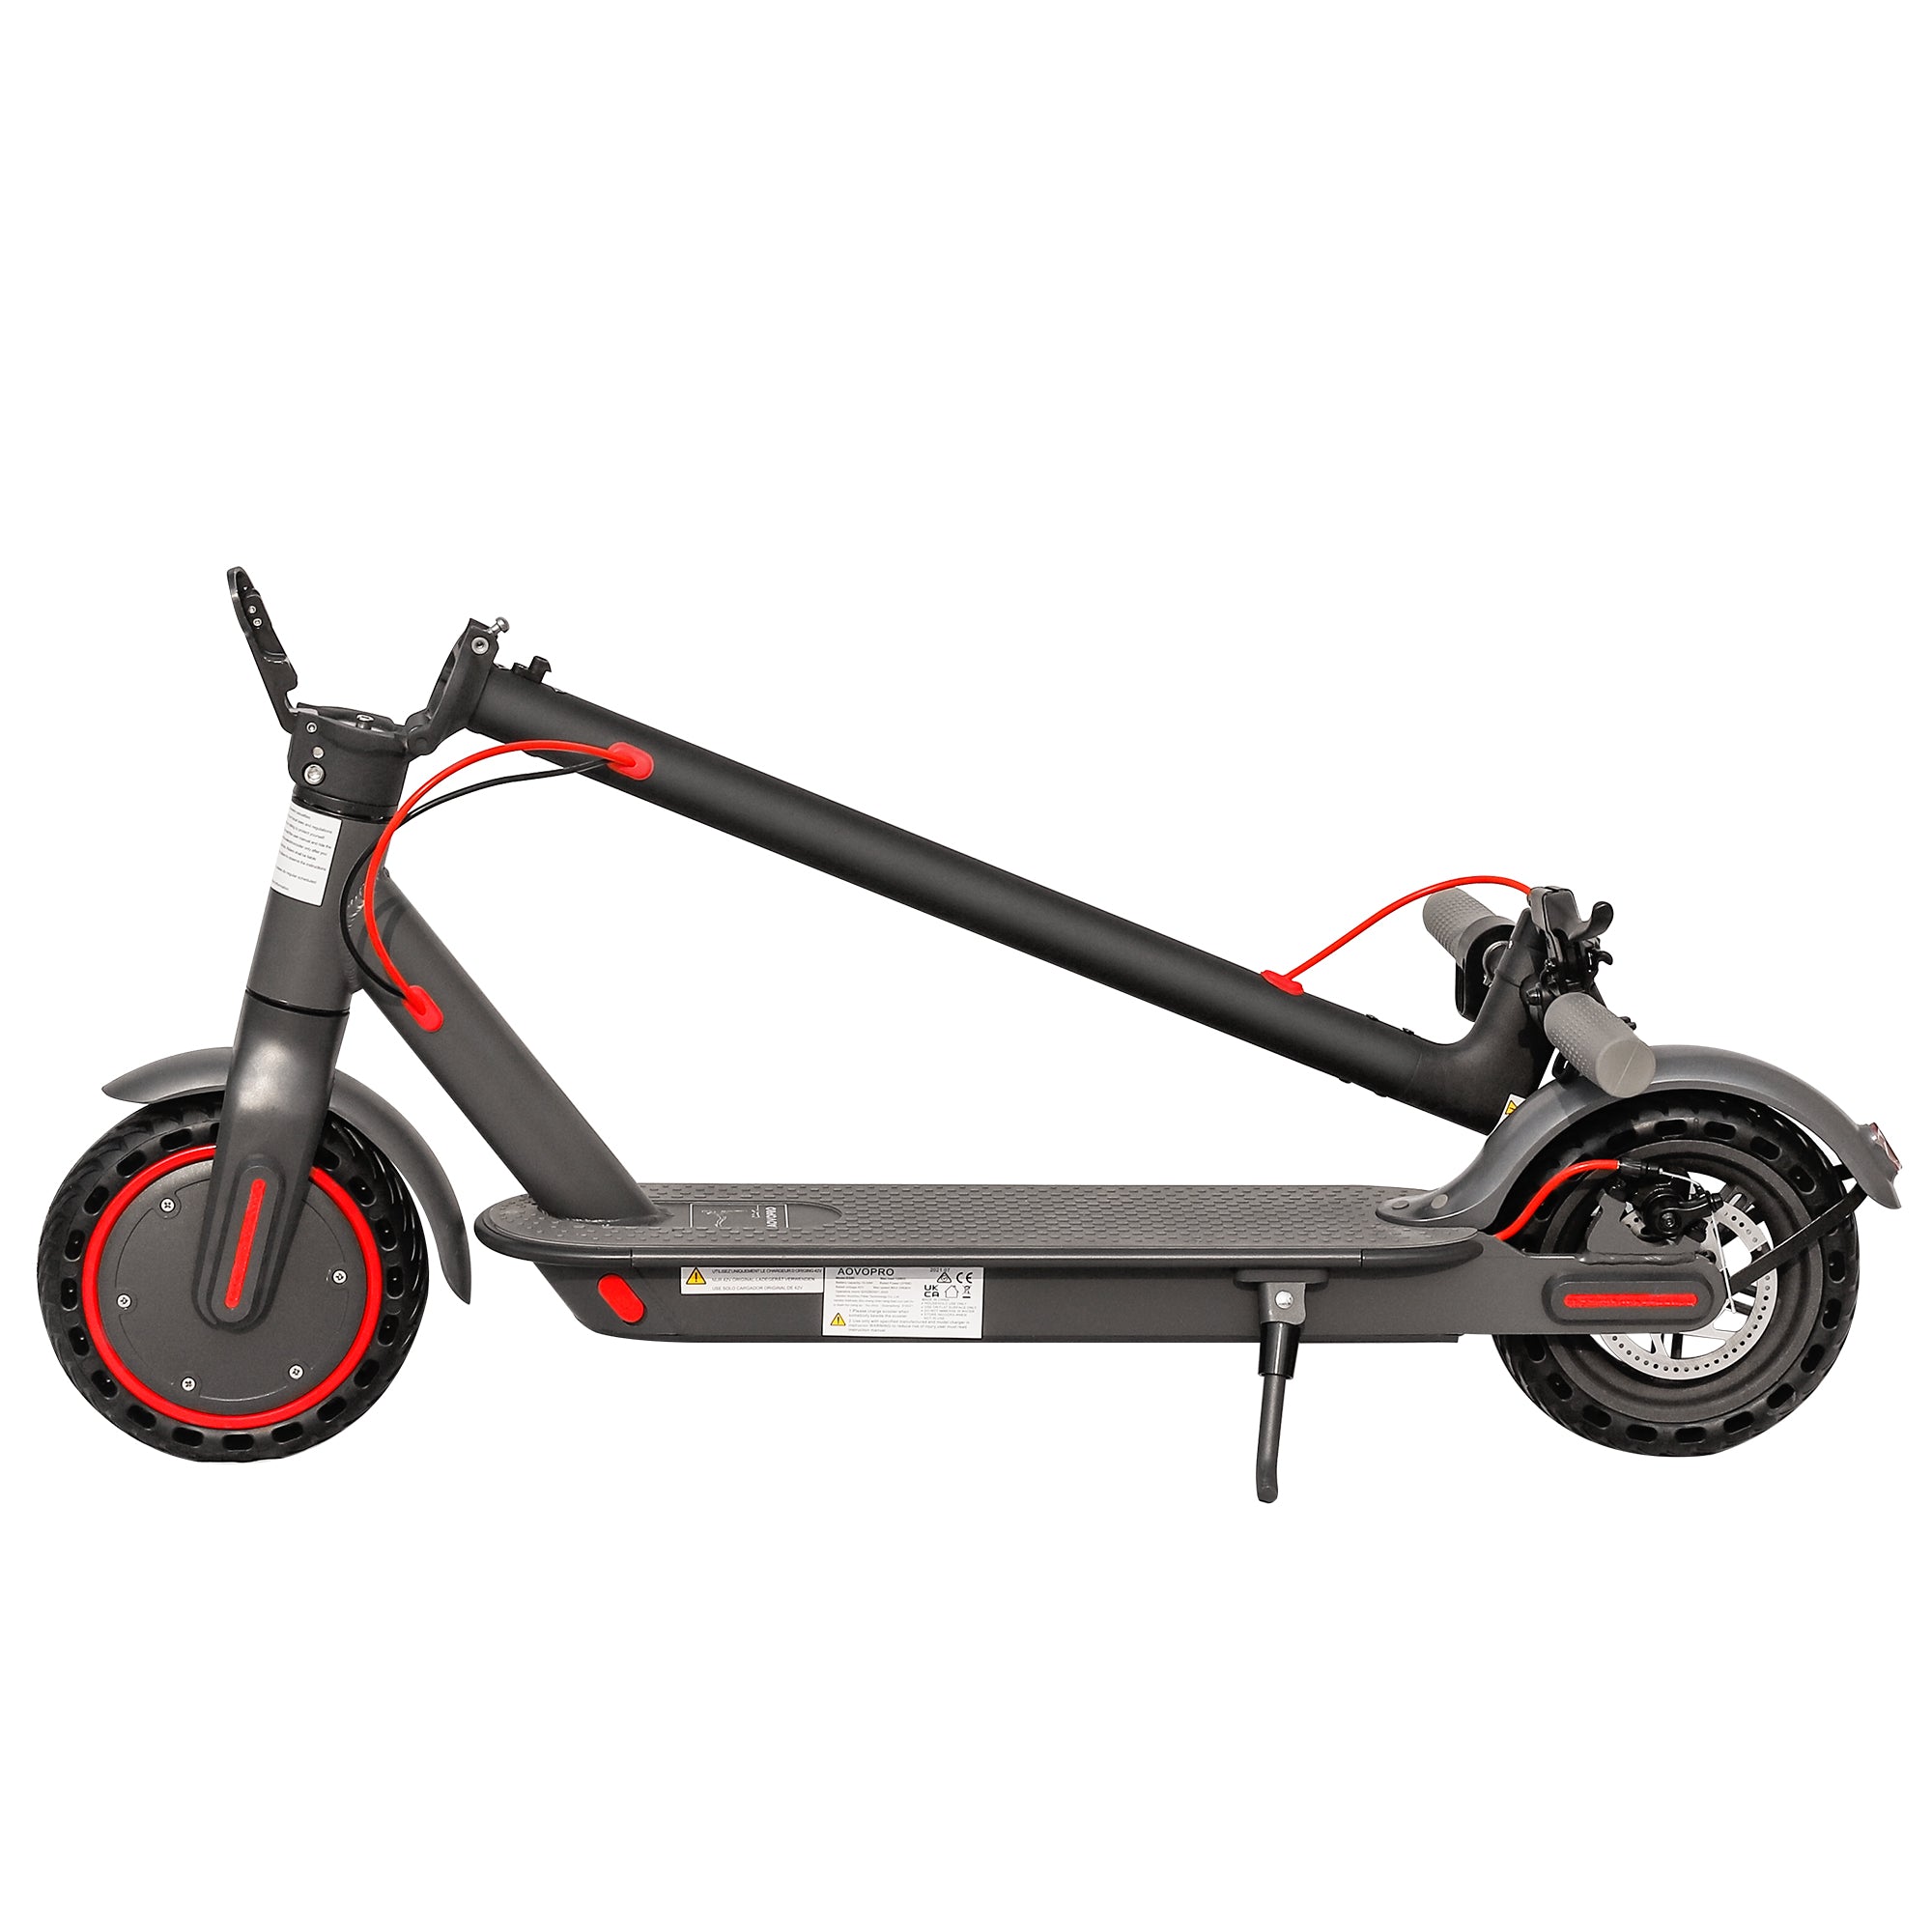 AOVOPRO ES80-M365PRO E-Scooter with 2 Wheels IP-65 Waterproof,350W Motor,8.5"Tire